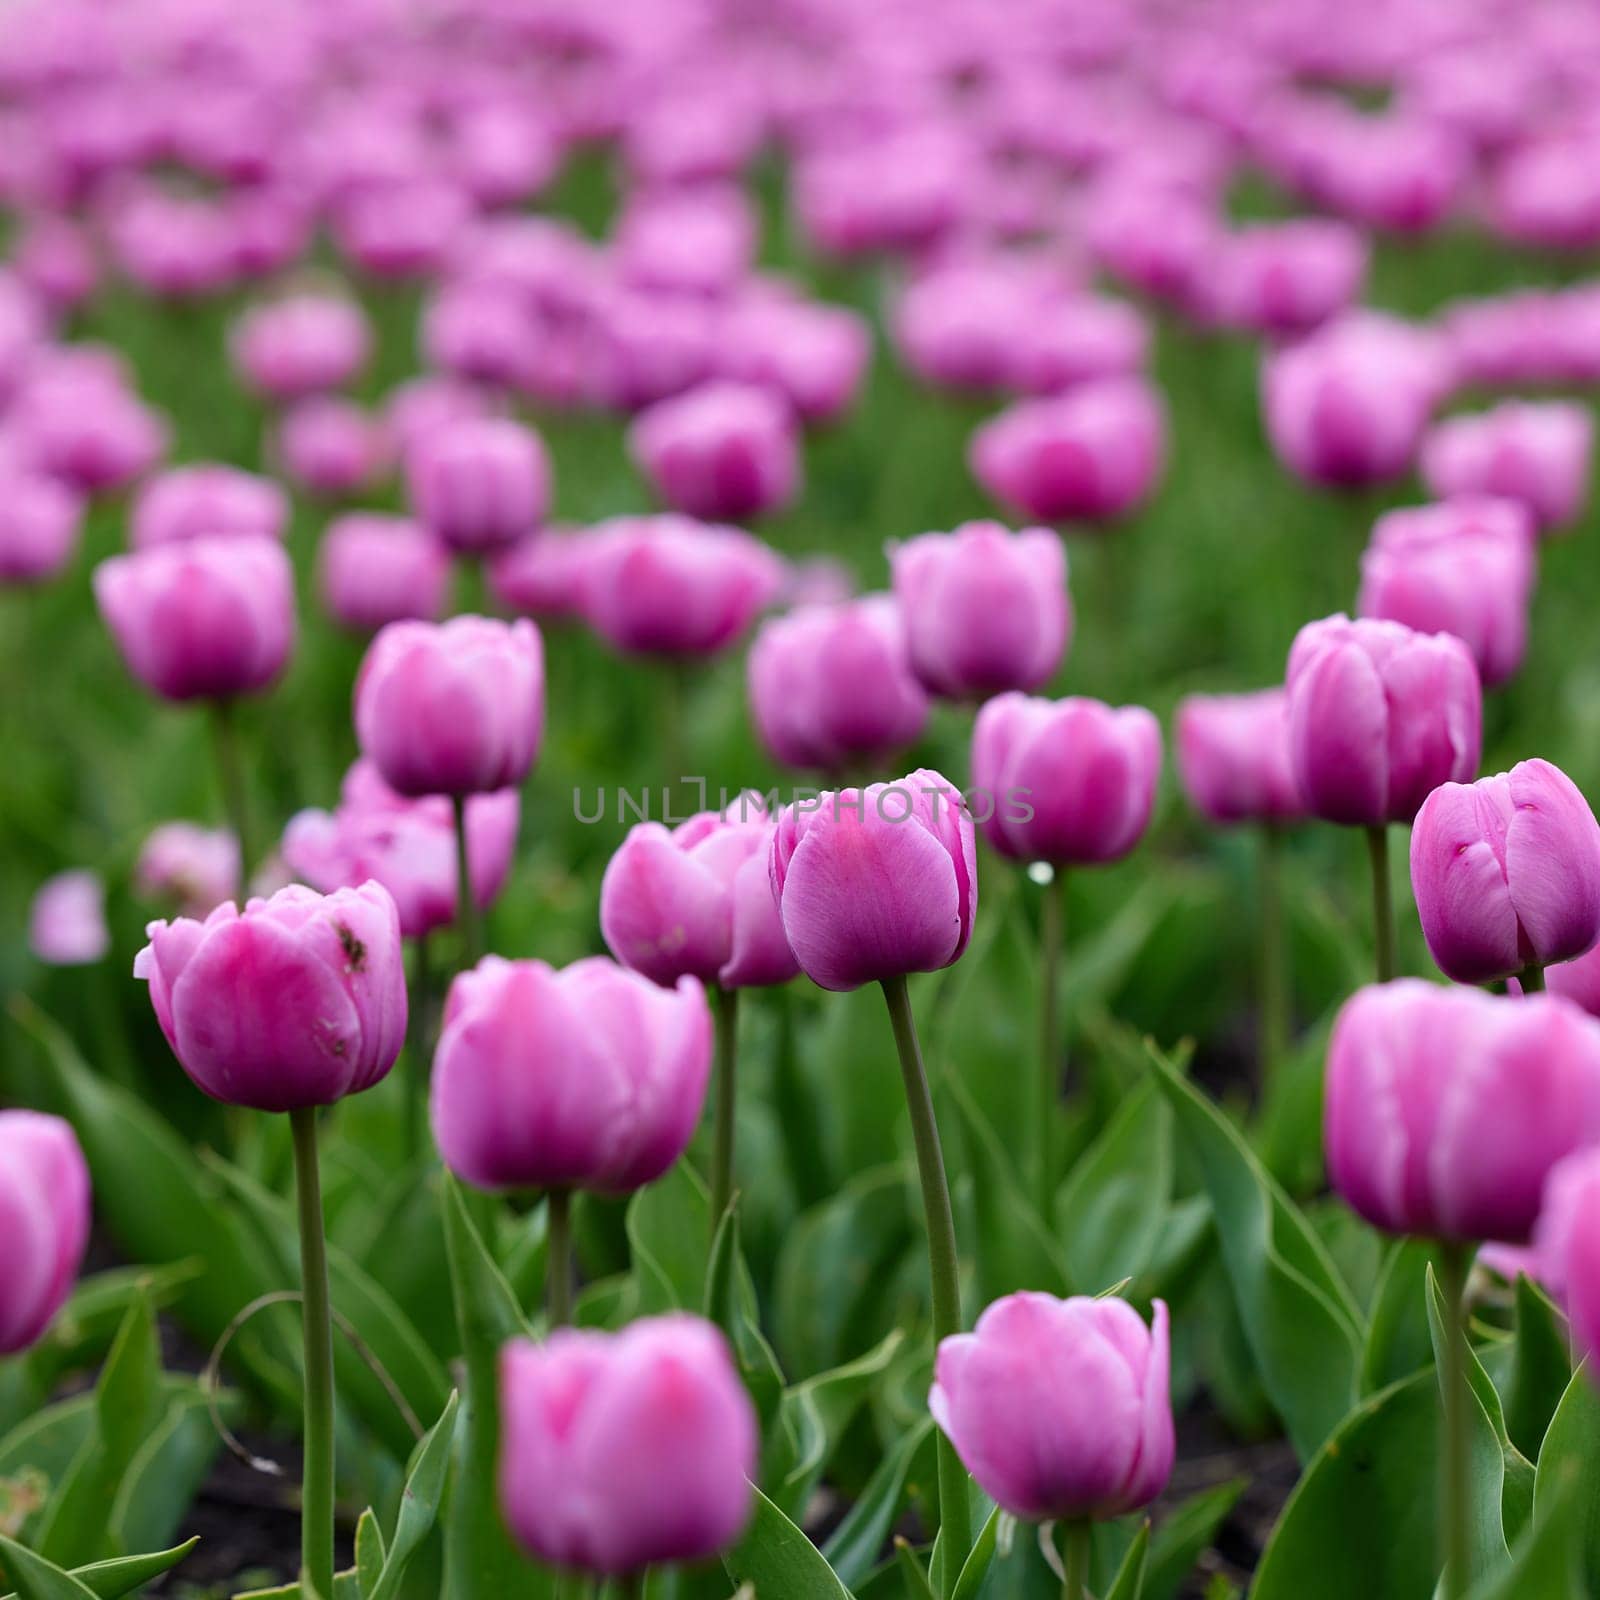 Beautiful bright colorful pink Spring pink tulips. Field of tulips. Tulip flowers blooming in the garden. Panning over many tulips in a field in spring. Colorful field of flowers in nature.